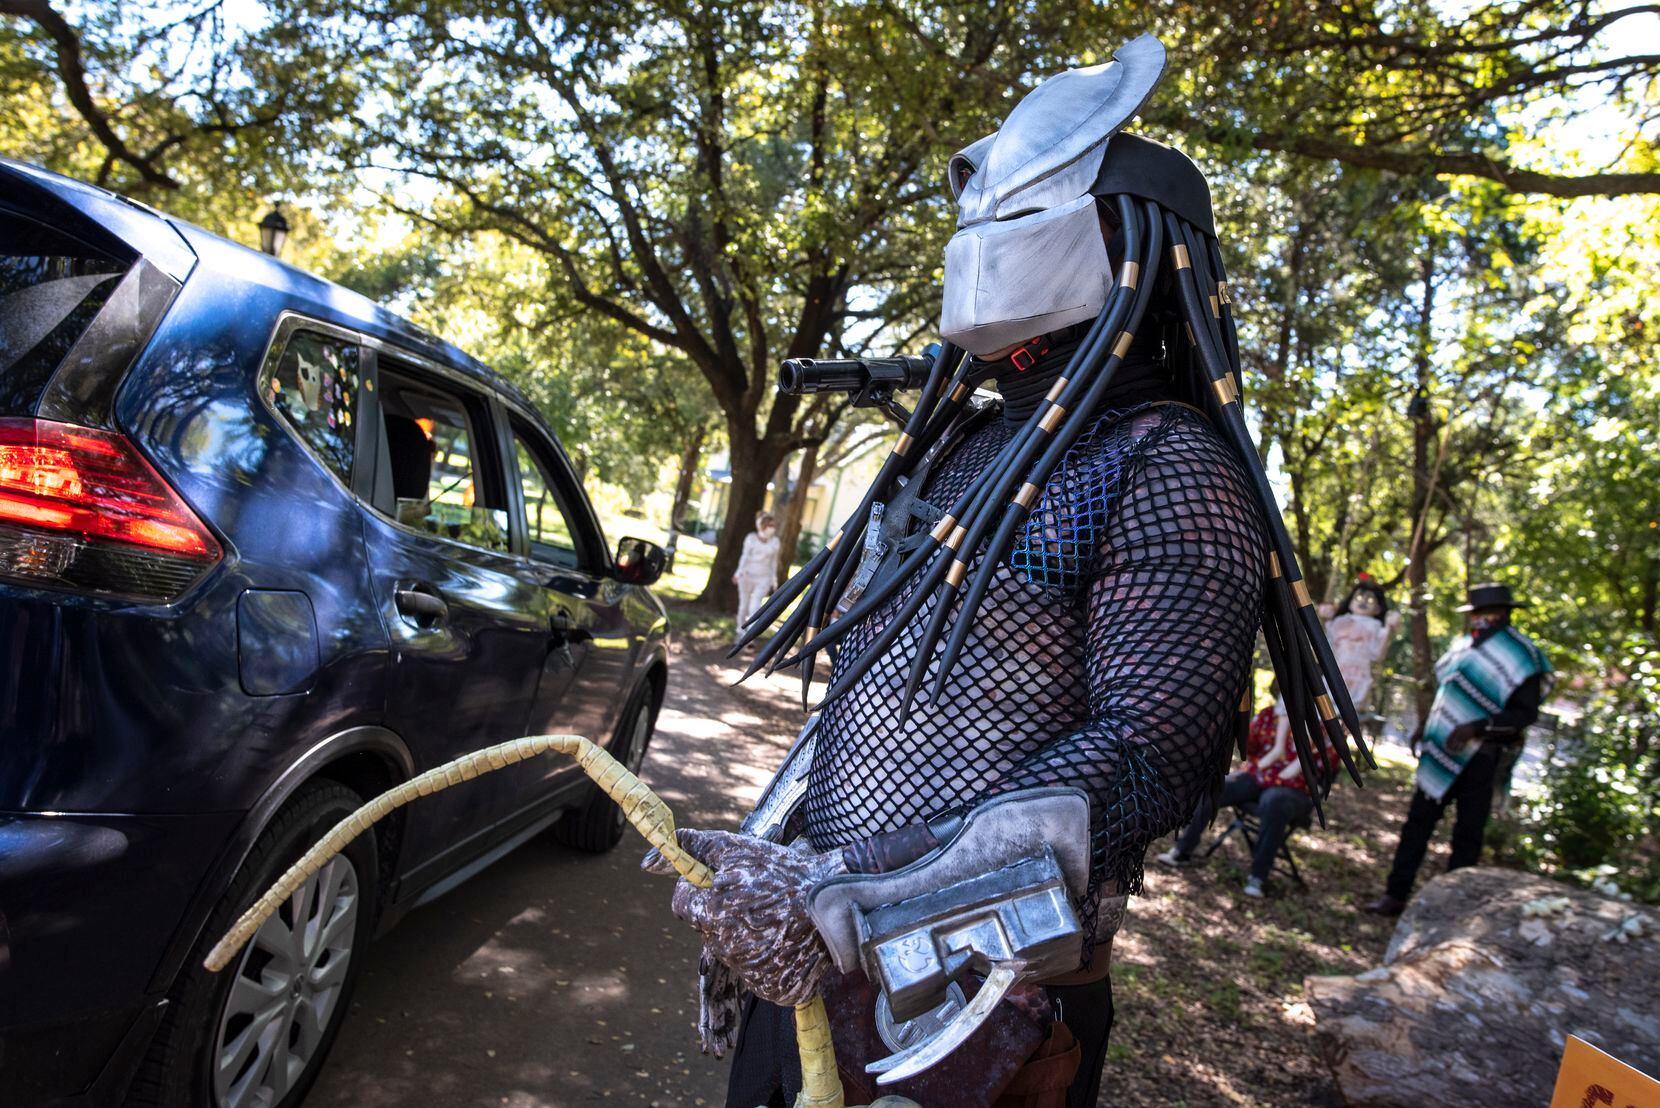 Mayor Pro-Tem Adam Medrano sports a Predator costume while greeting families as they drive-through the contactless Candy Caravan event hosted by The City of Dallas at Dallas Heritage Village, on Saturday, Oct. 31, 2020.